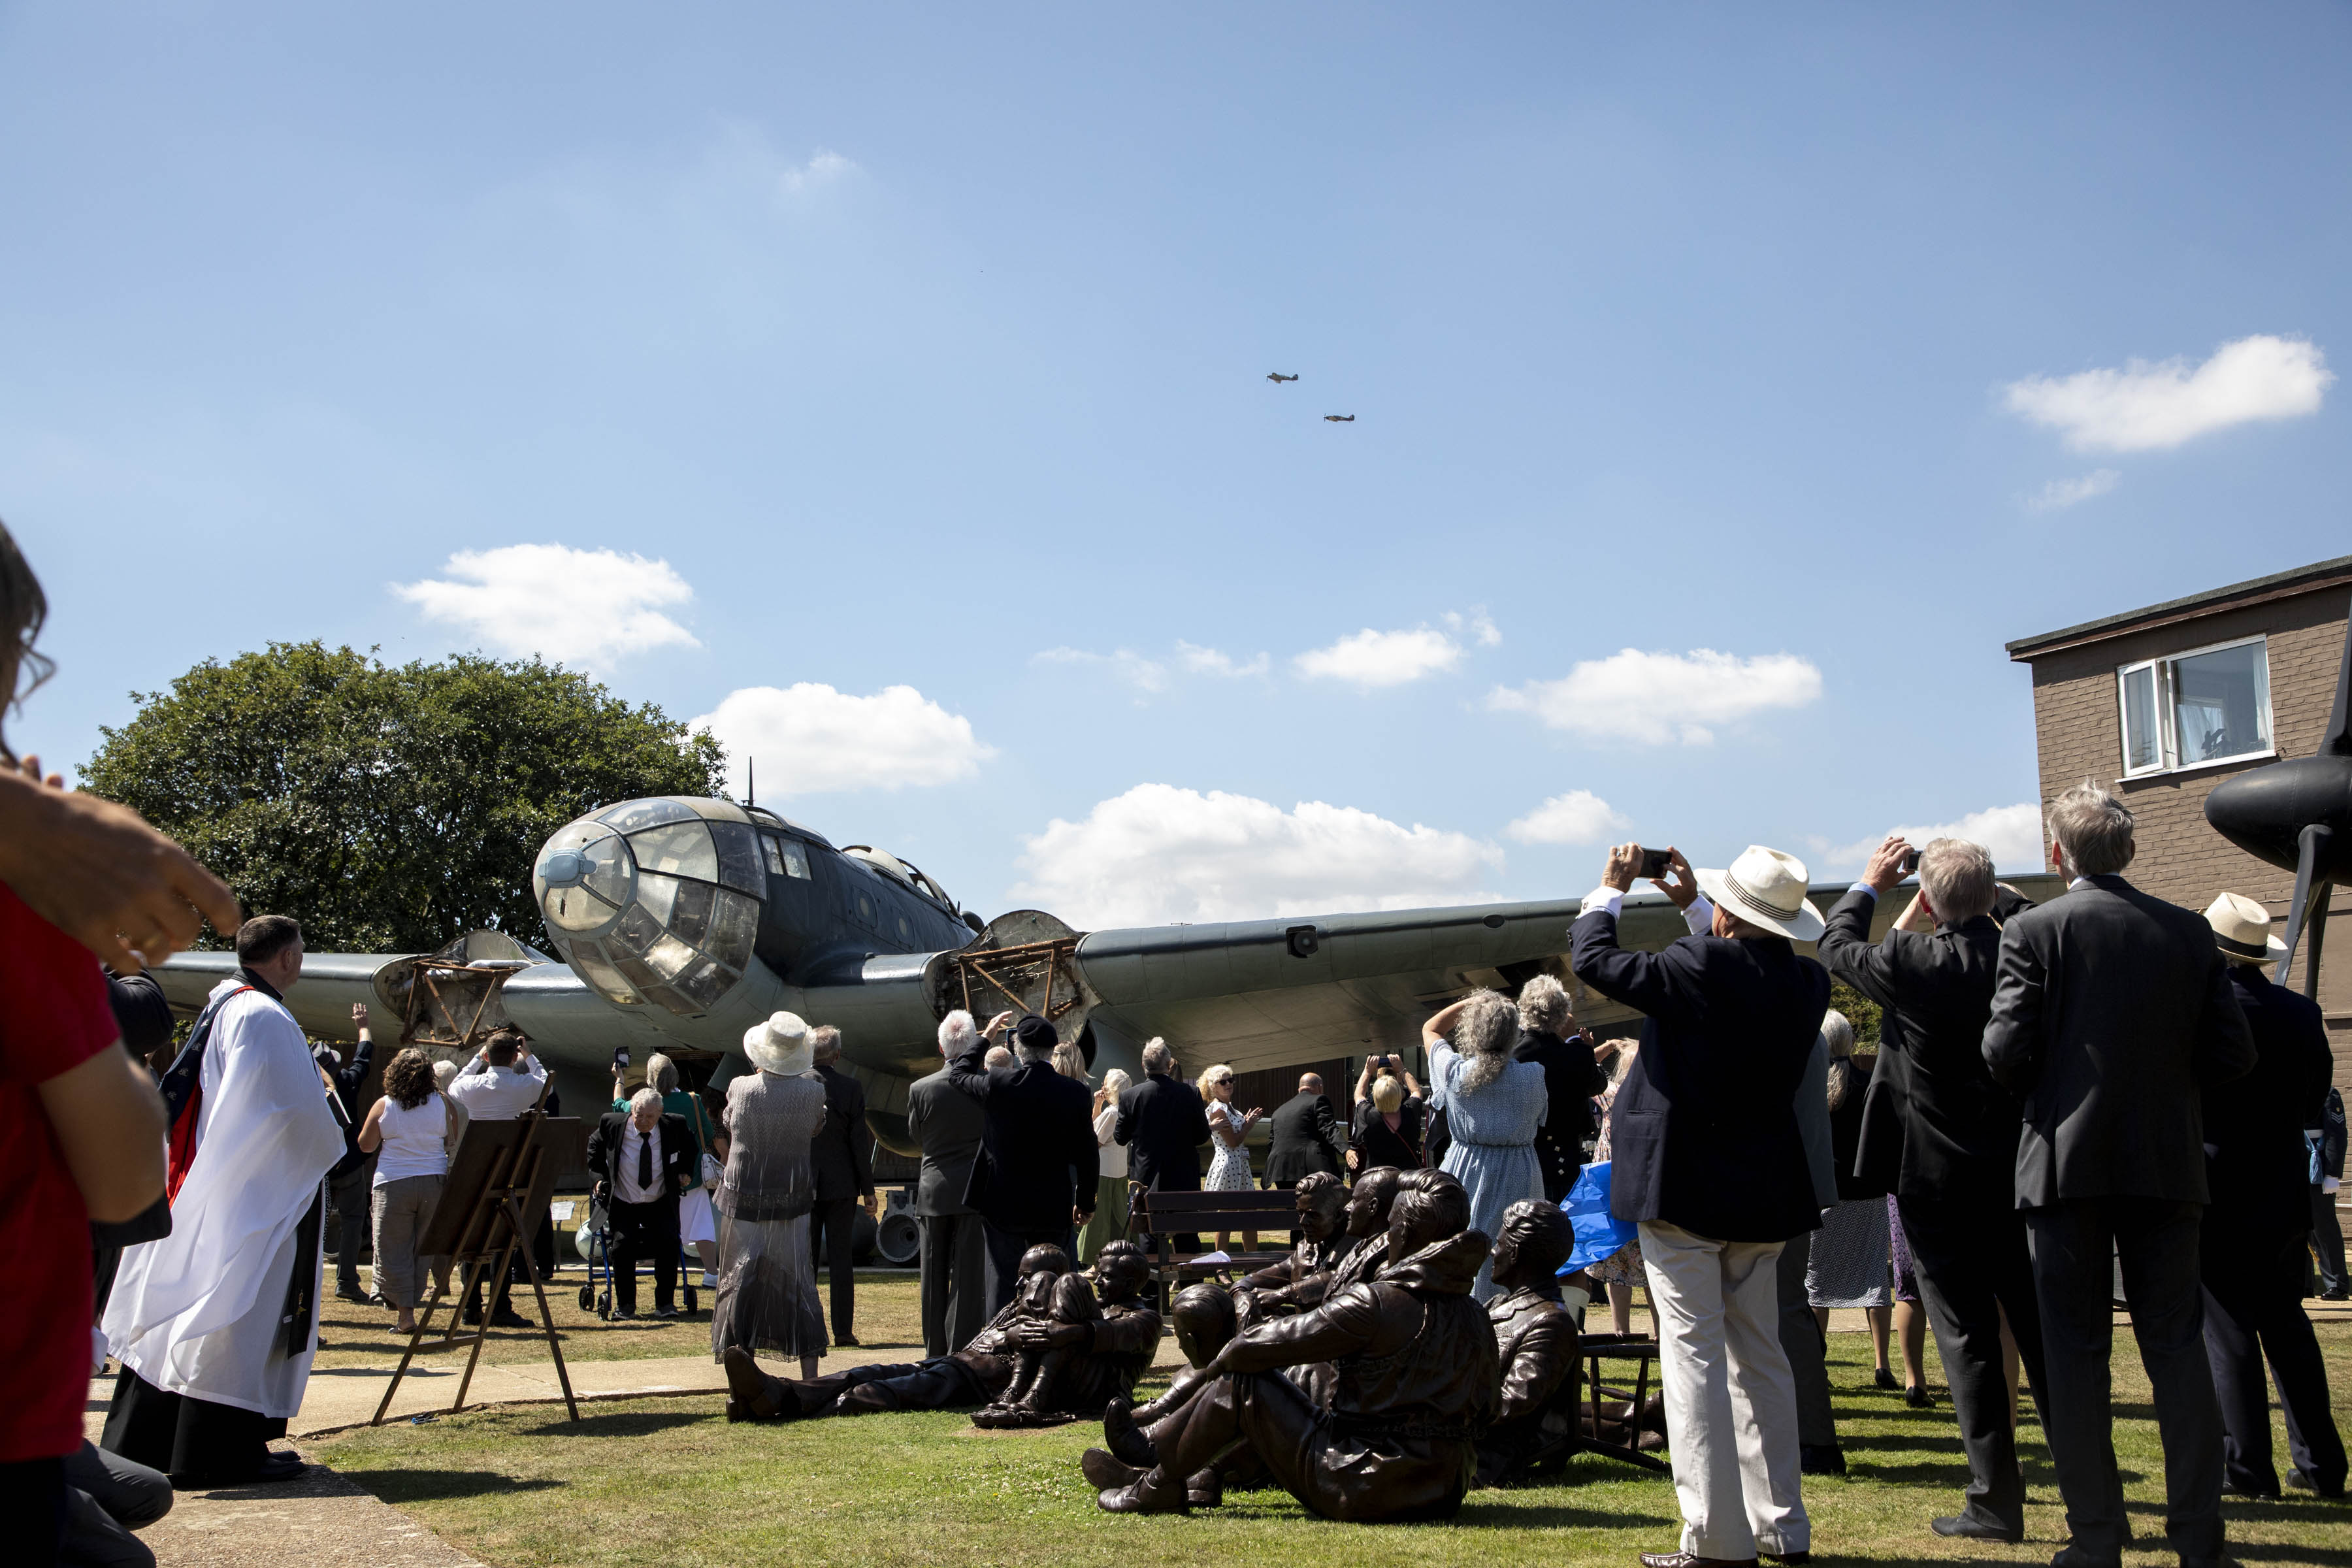 Image shows aviators and members of the public outside with Hurricane aircraft taking picture of flypast.